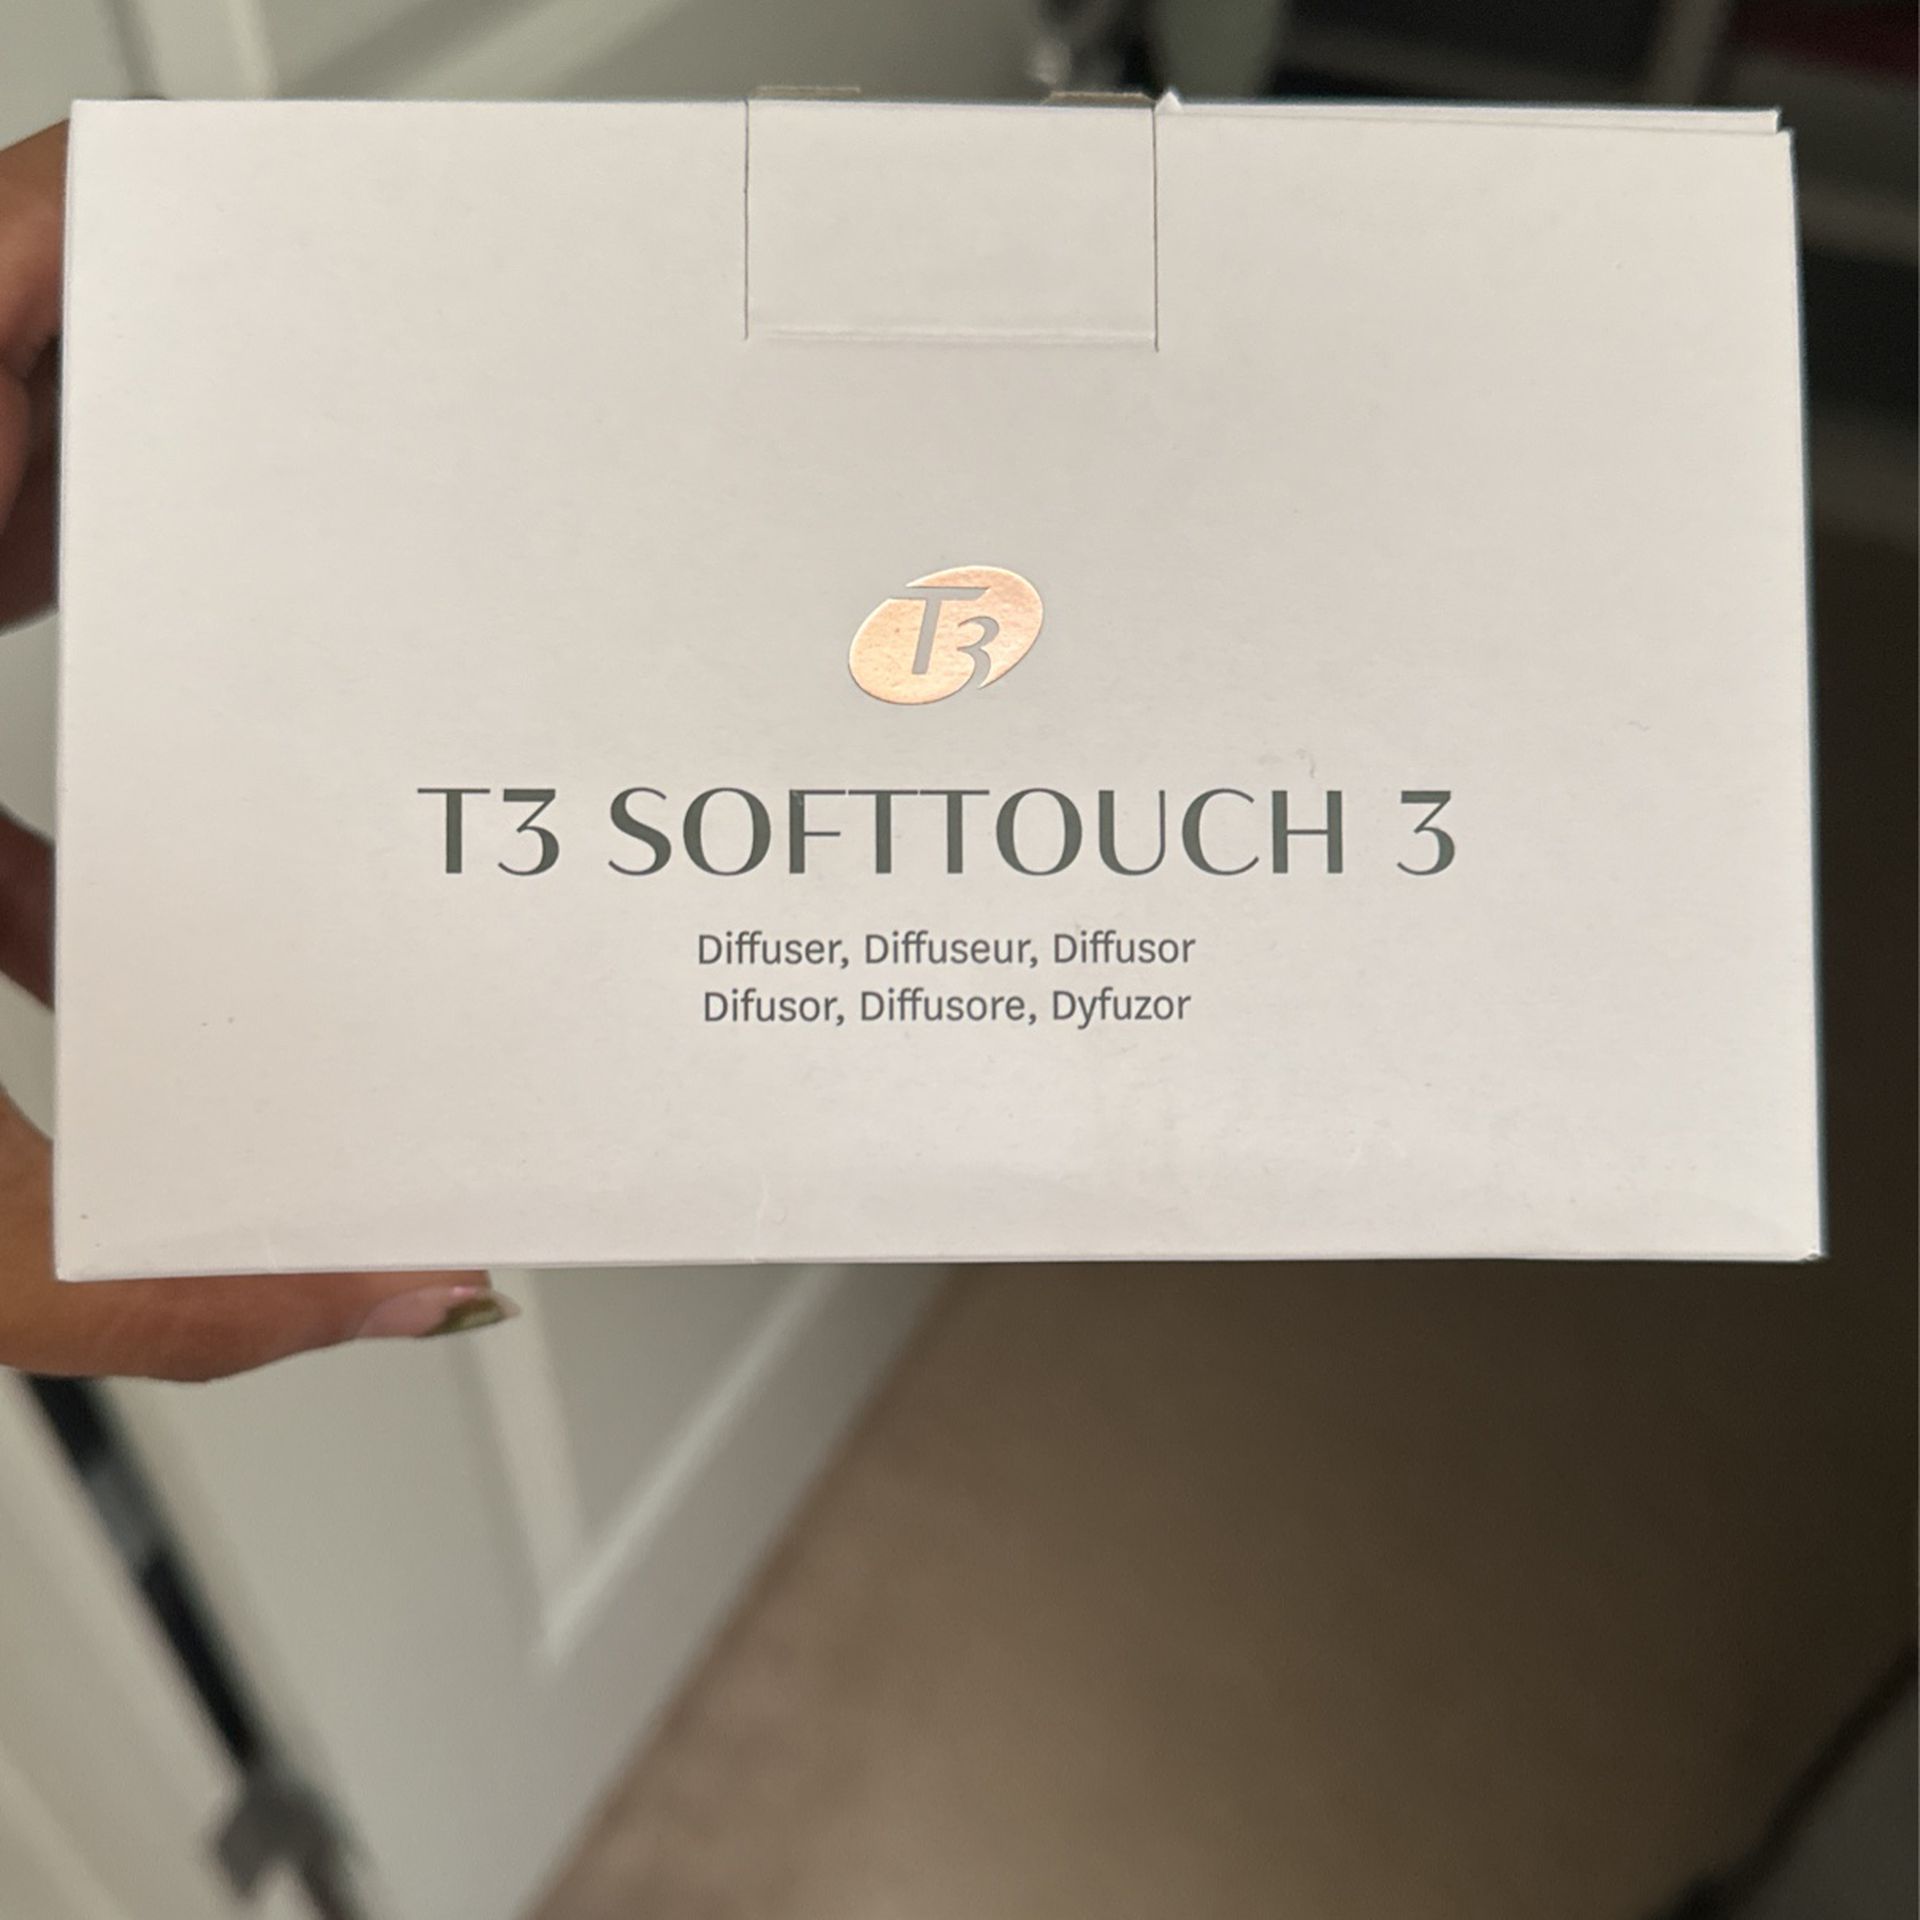 T3 Soft touch 3